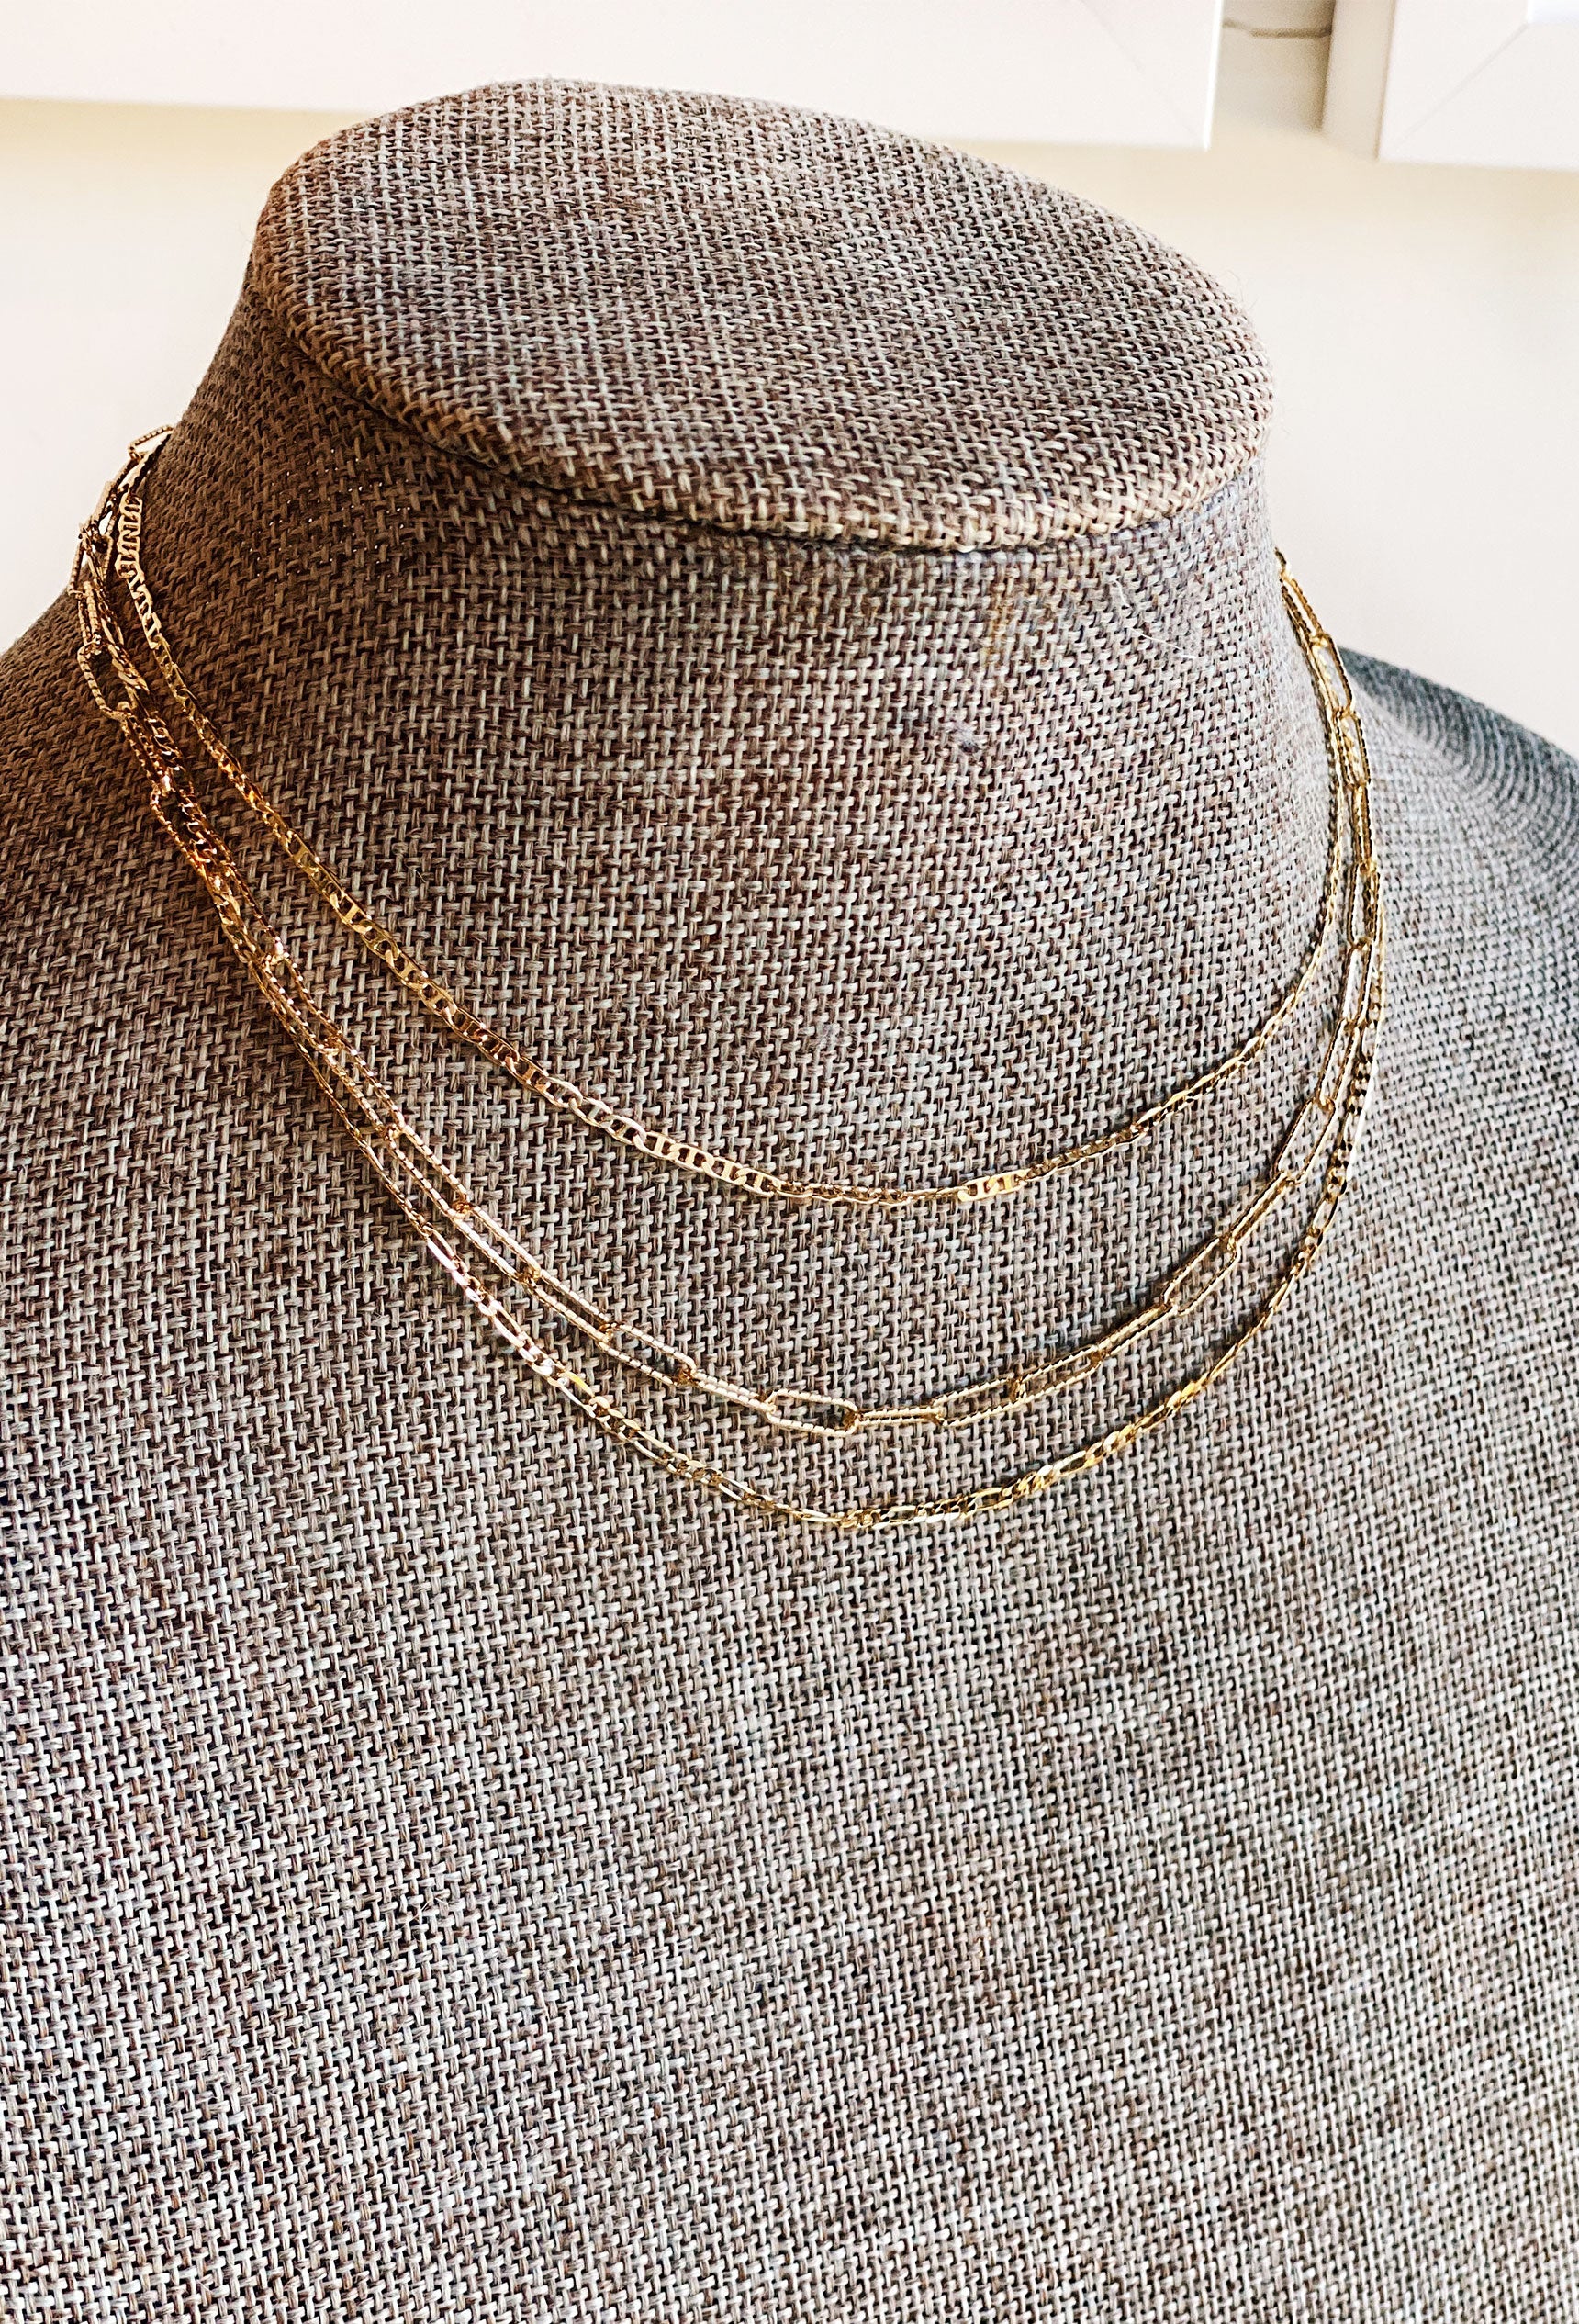 Columbus Textured Chain Link Necklace | Groovy's | Gold | Dainty Chain